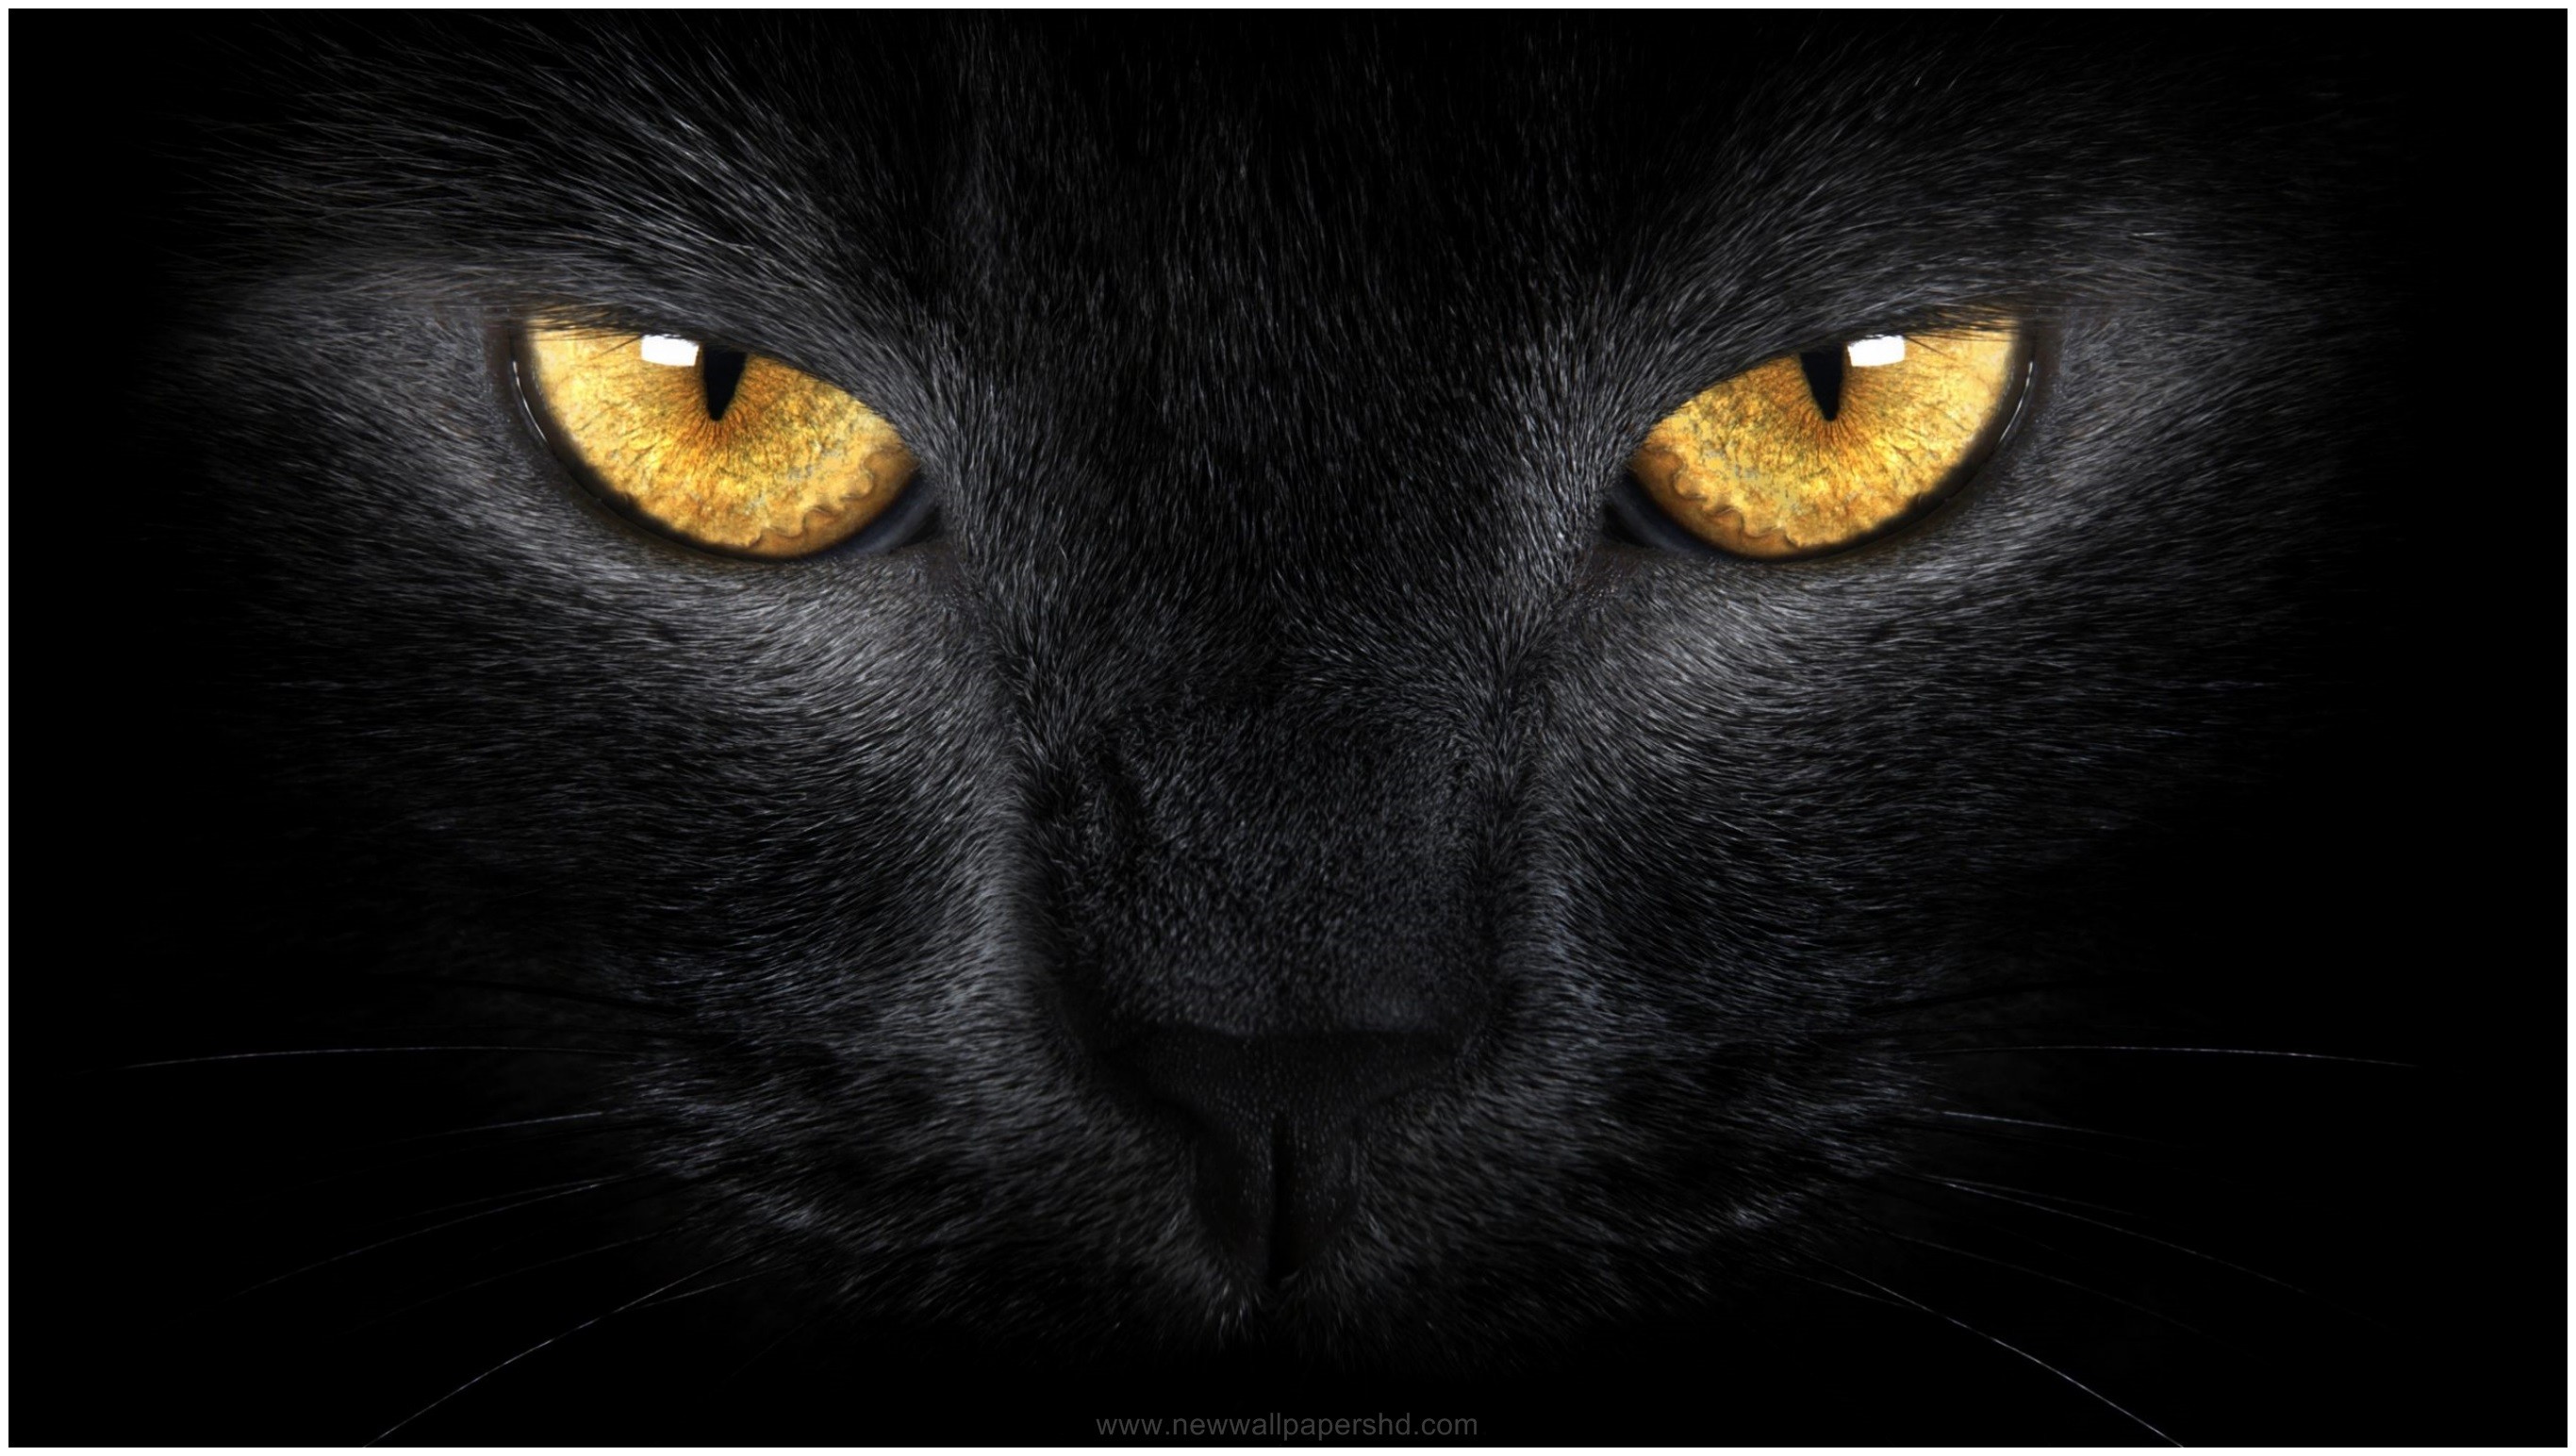 2732x1544 BLACK CAT FACE AND EYES HD WALLPAPER